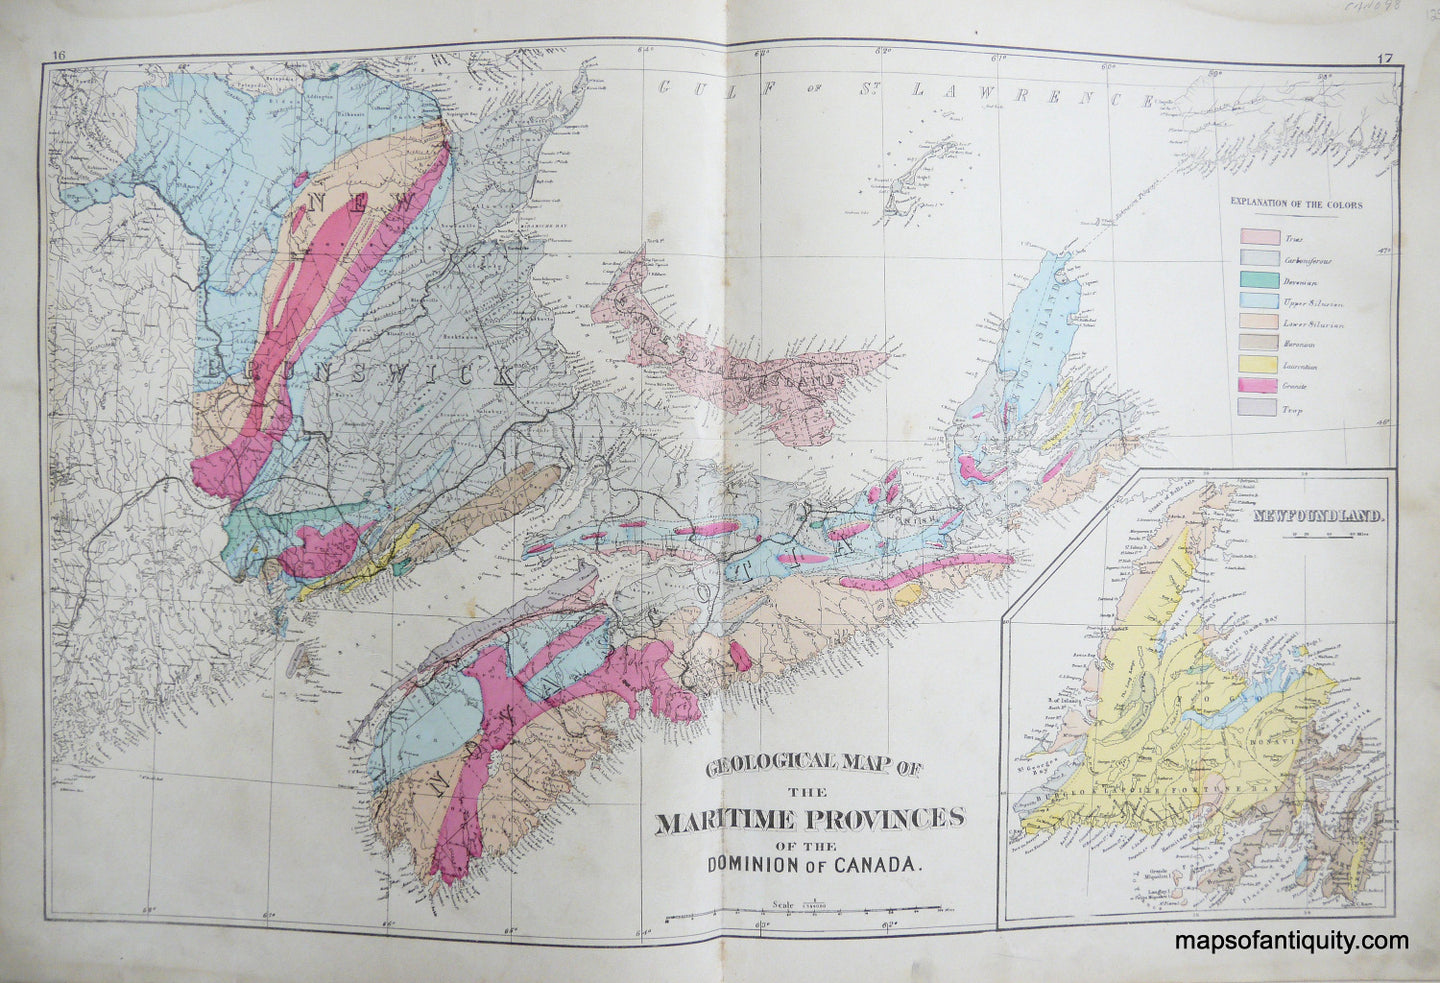 Antique-Hand-Colored-Map-Geological-Map-of-Maritime-Provinces-of-the-Dominion-of-Canada-North-America-Canada-1879-Roe-Maps-Of-Antiquity